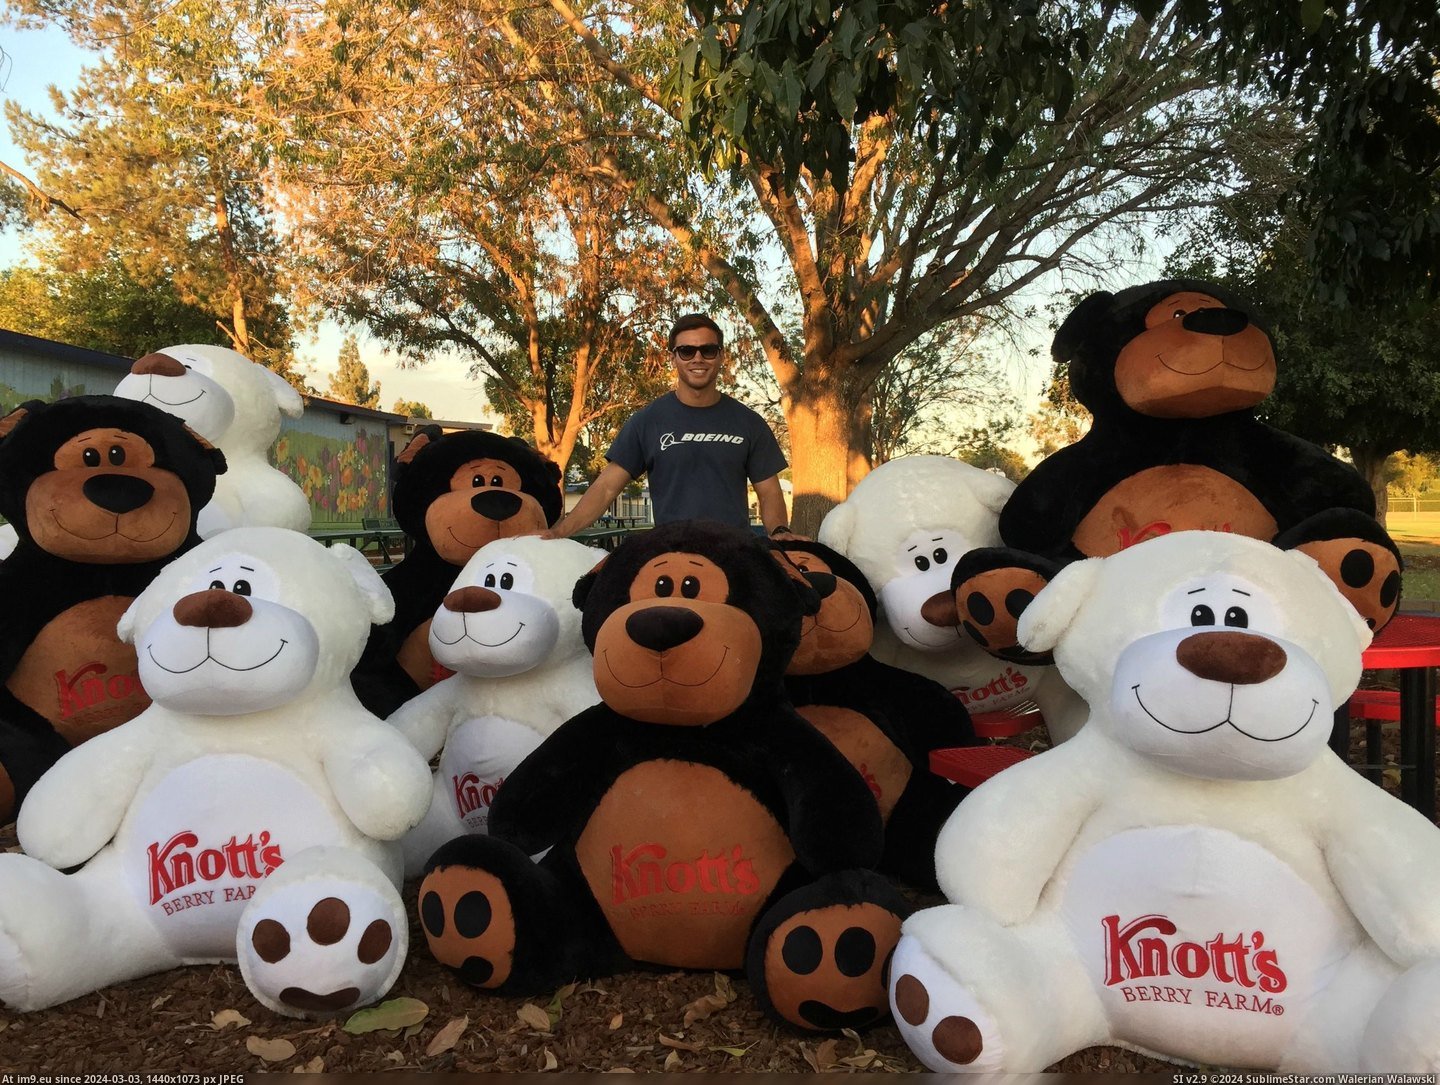 #Funny #Thought #Farm #Bears #Berry #Giant #Win [Funny] I was so preoccupied with the thought of whether or not I could win 10 giant bears from Knott's Berry Farm, I didn't sto Pic. (Bild von album My r/FUNNY favs))